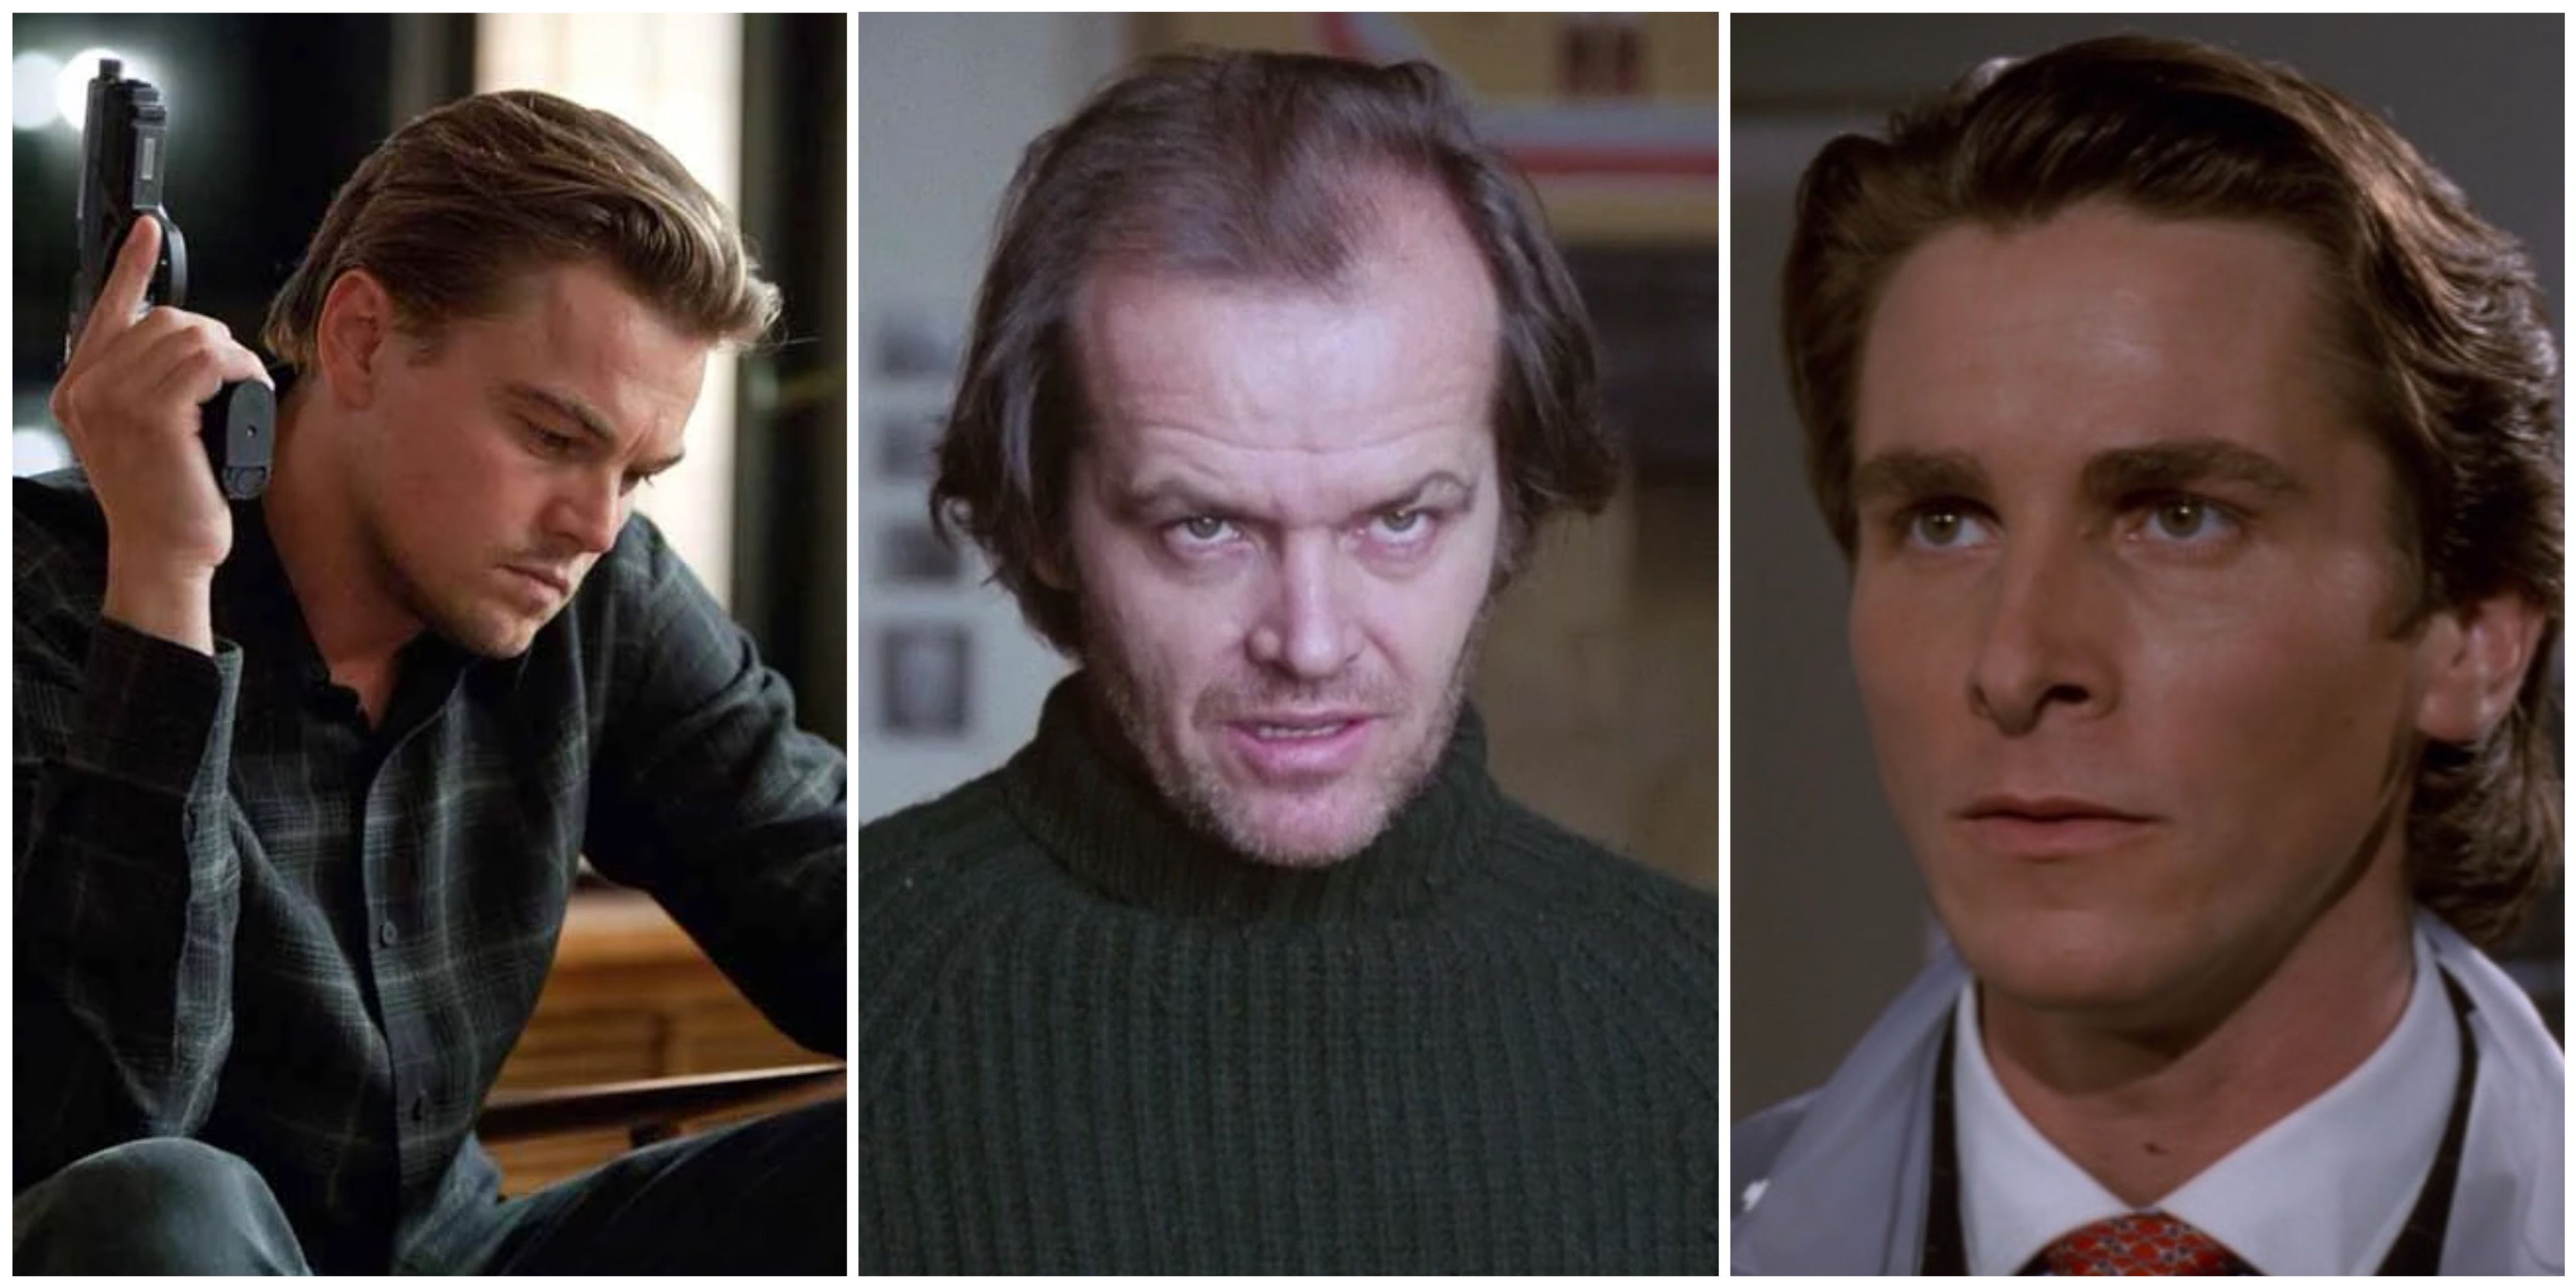 Leonardo DiCaprio in Inception, Jack Nicholson in The Shining, and Christian Bale in American Psycho